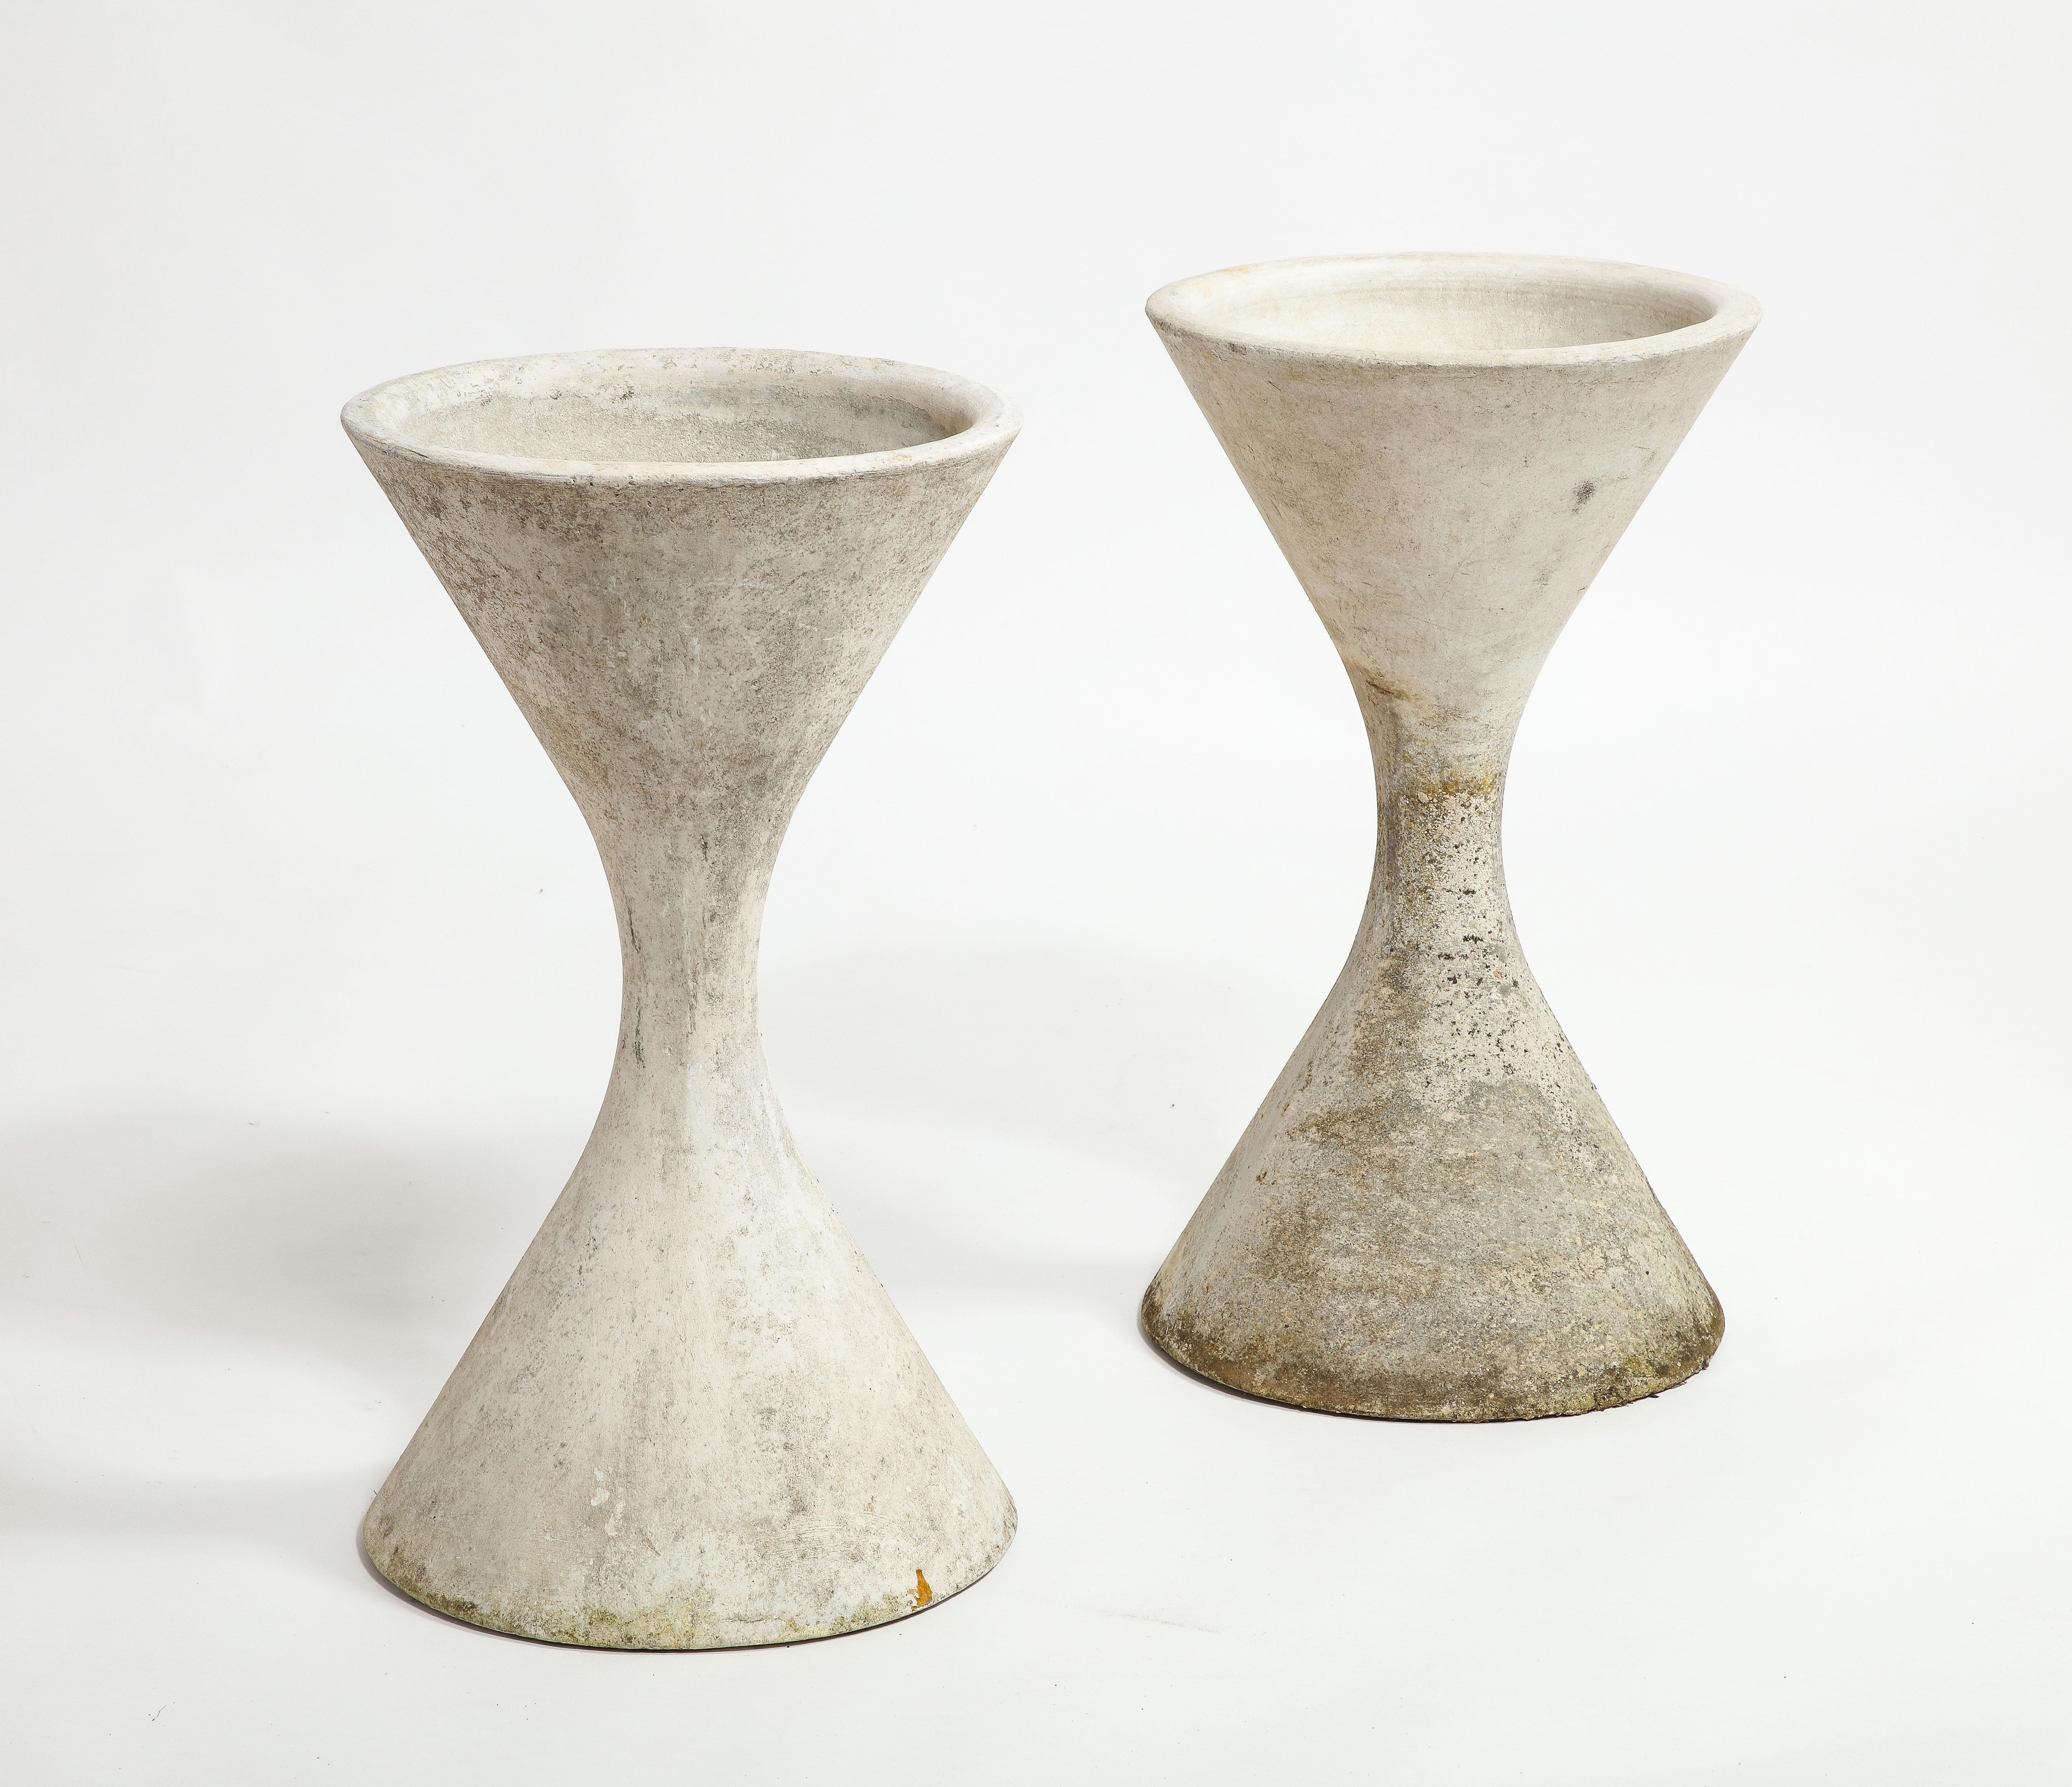 Mid-20th Century Willy Guhl for Eternit Medium Concrete Diabolo Spindel Planters, 1960s For Sale